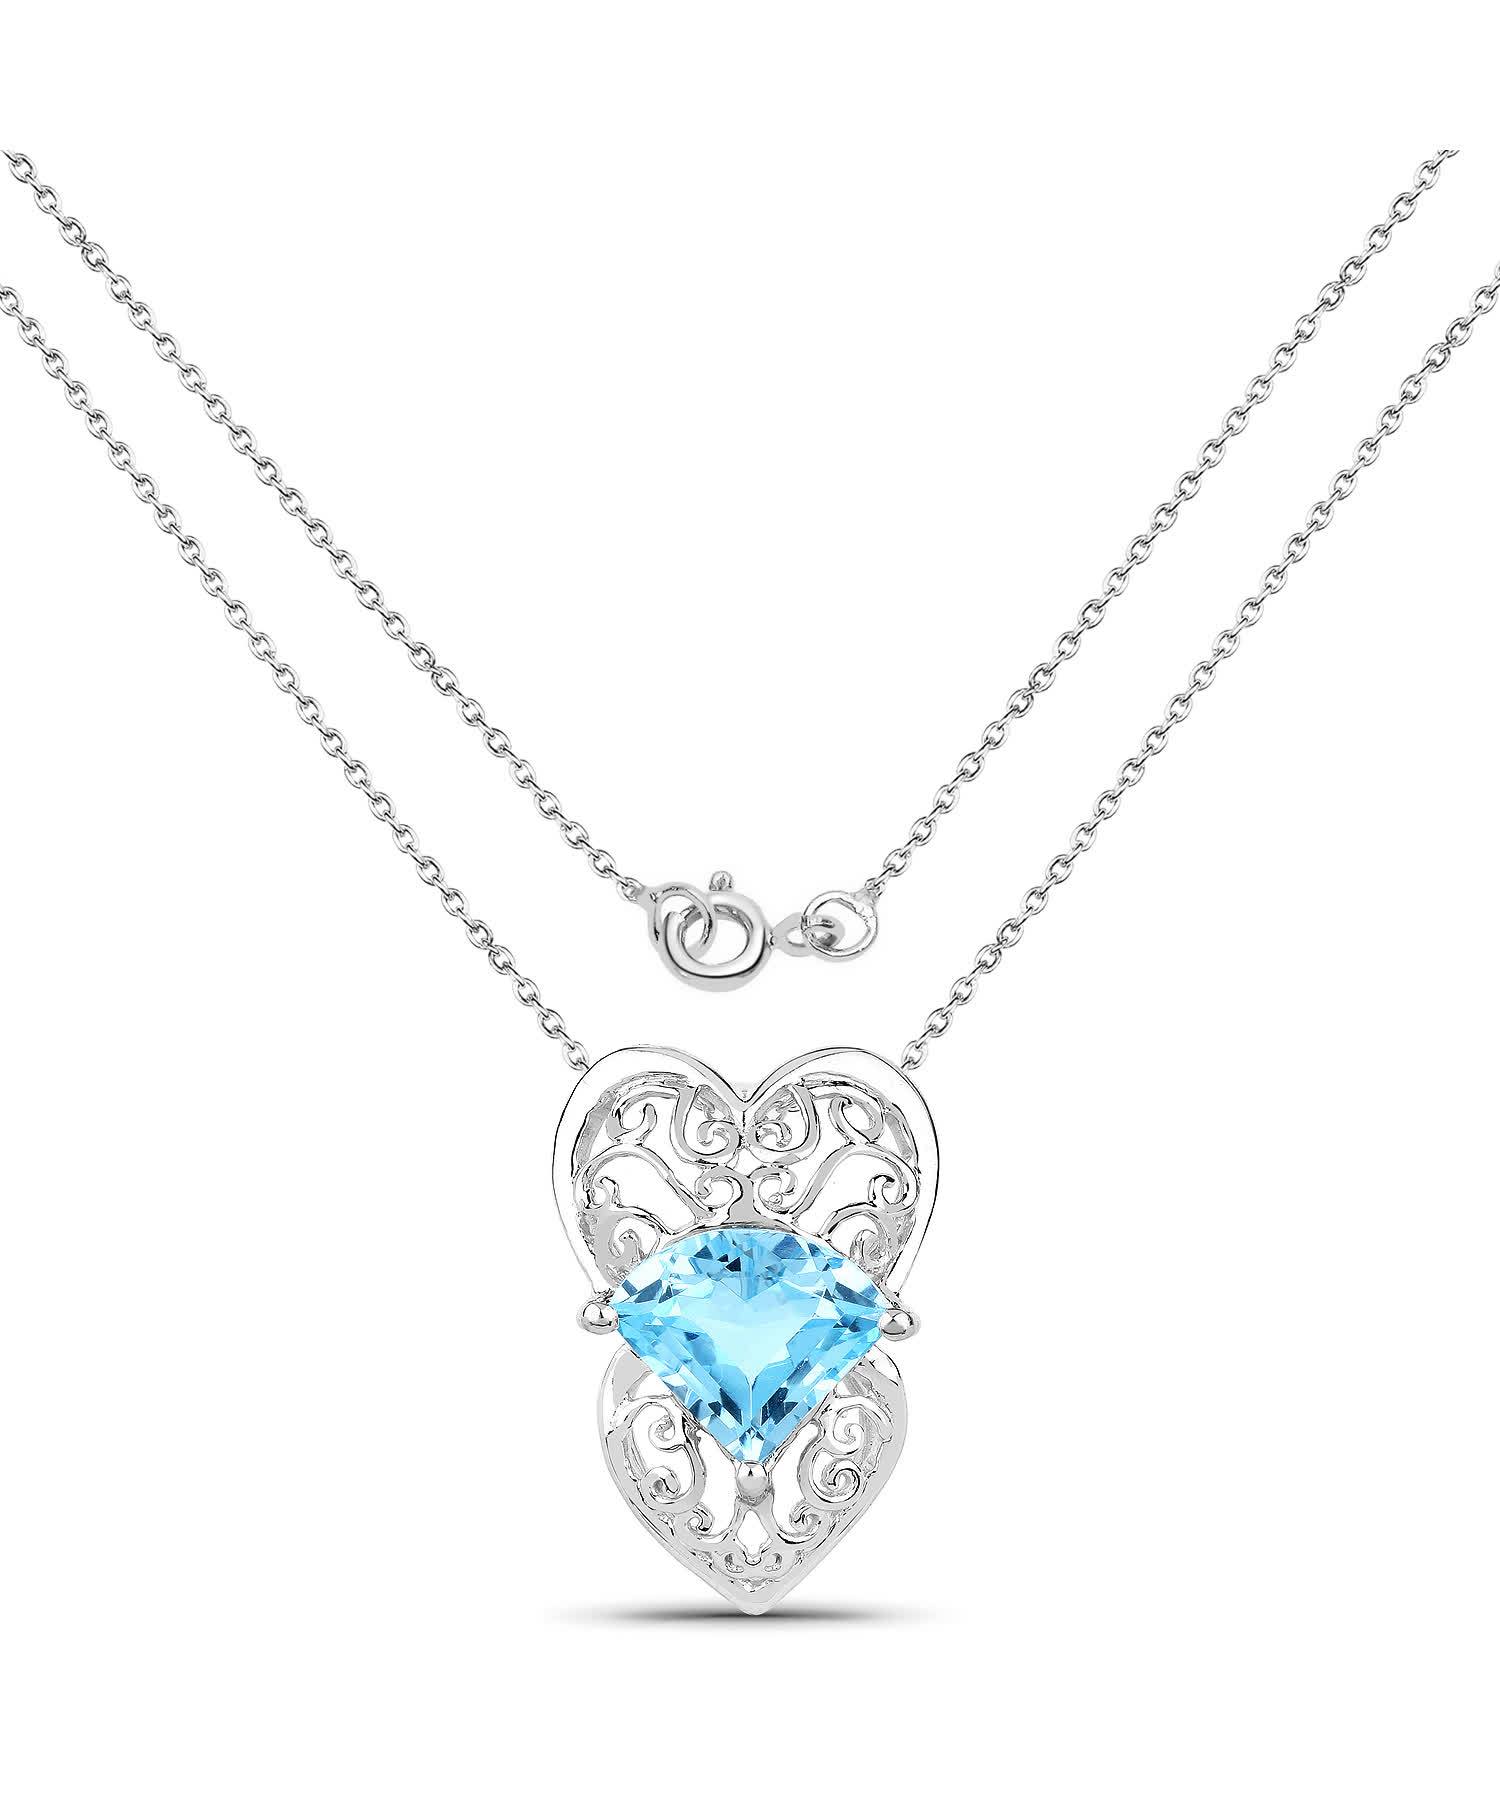 4.65ctw Natural Swiss Blue Topaz Rhodium Plated 925 Sterling Silver Heart Pendant With Chain View 2